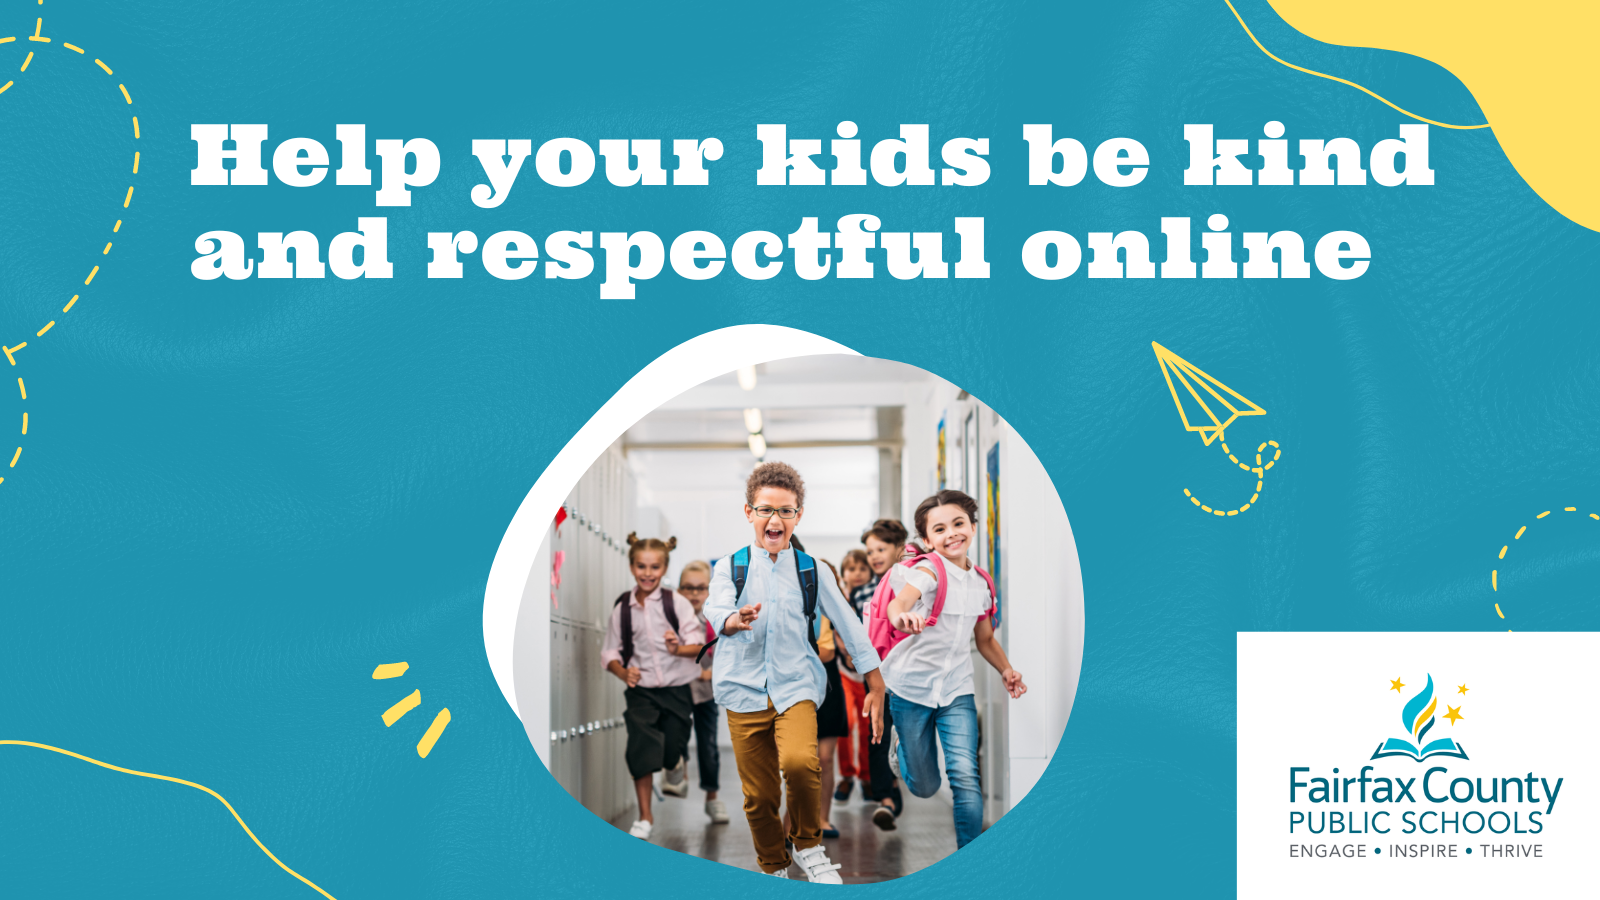 Help your kids be kind and respectful when online.